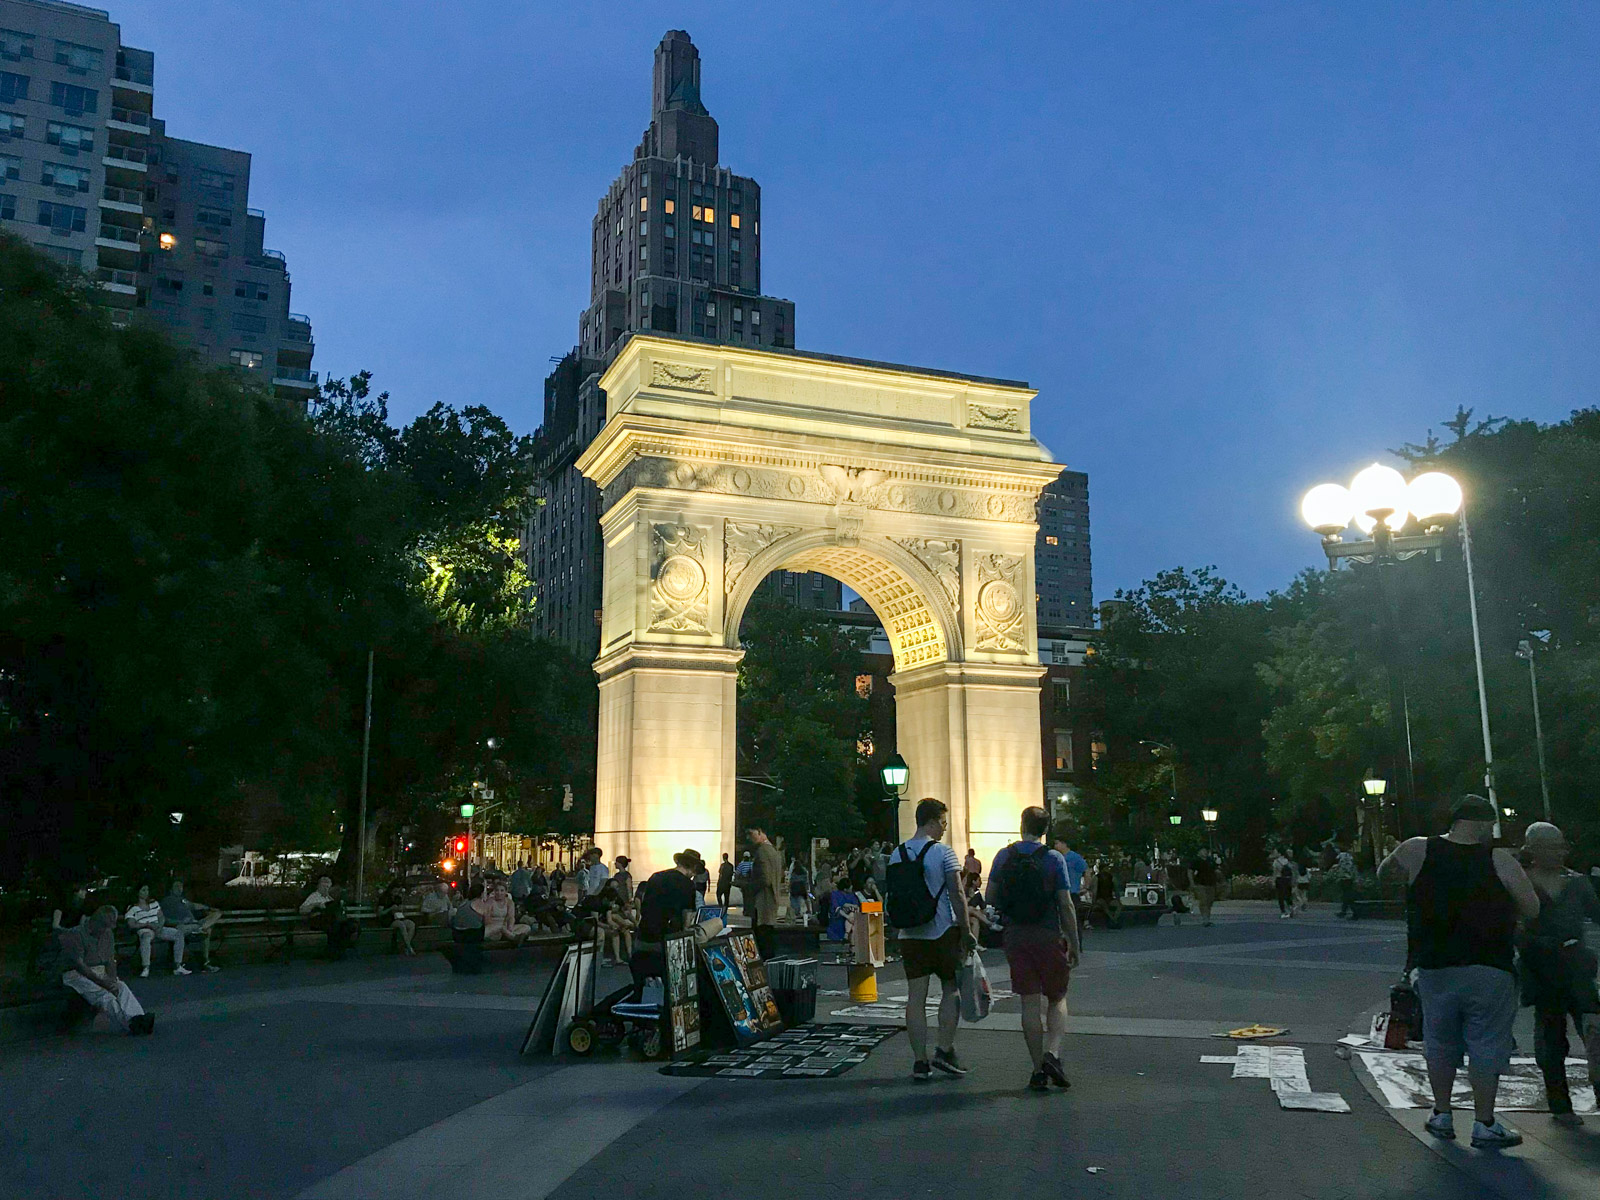 Washington Square Arch, a tall arch structure, lit up in the evening. In the foreground, people are sharing their artwork with it laid out on the ground